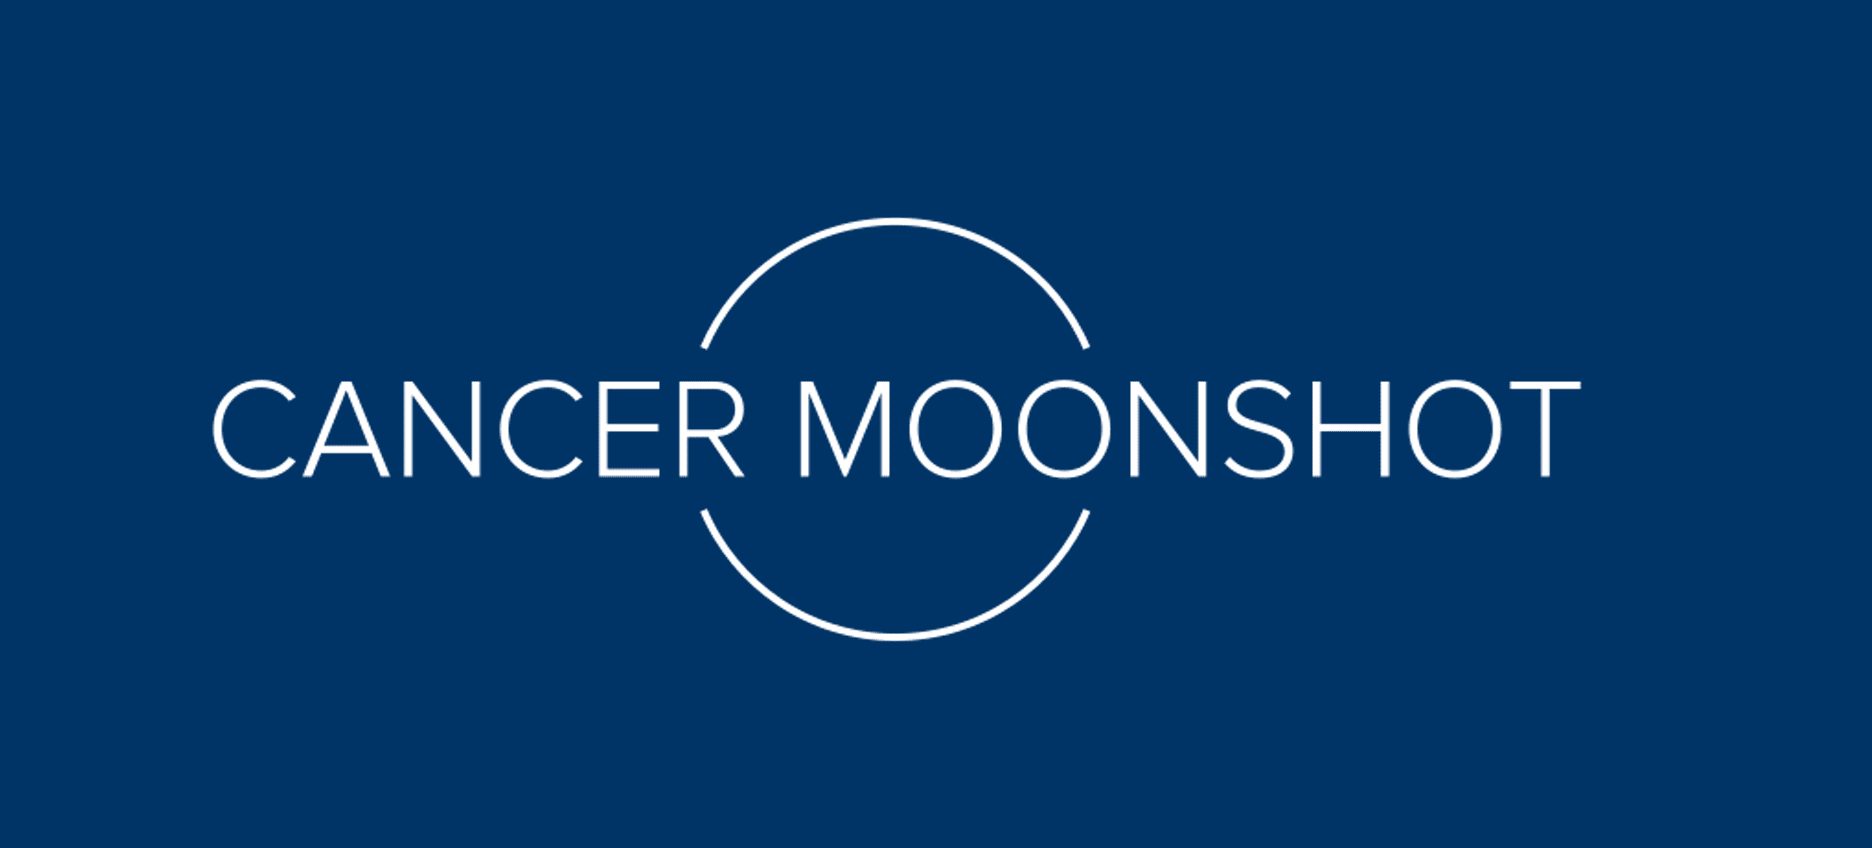 ‘A Call to Action’: Dr. Peter Kuhn of USC Michelson Center Visits White House to Help Launch President Biden’s Cancer Moonshot Initiative